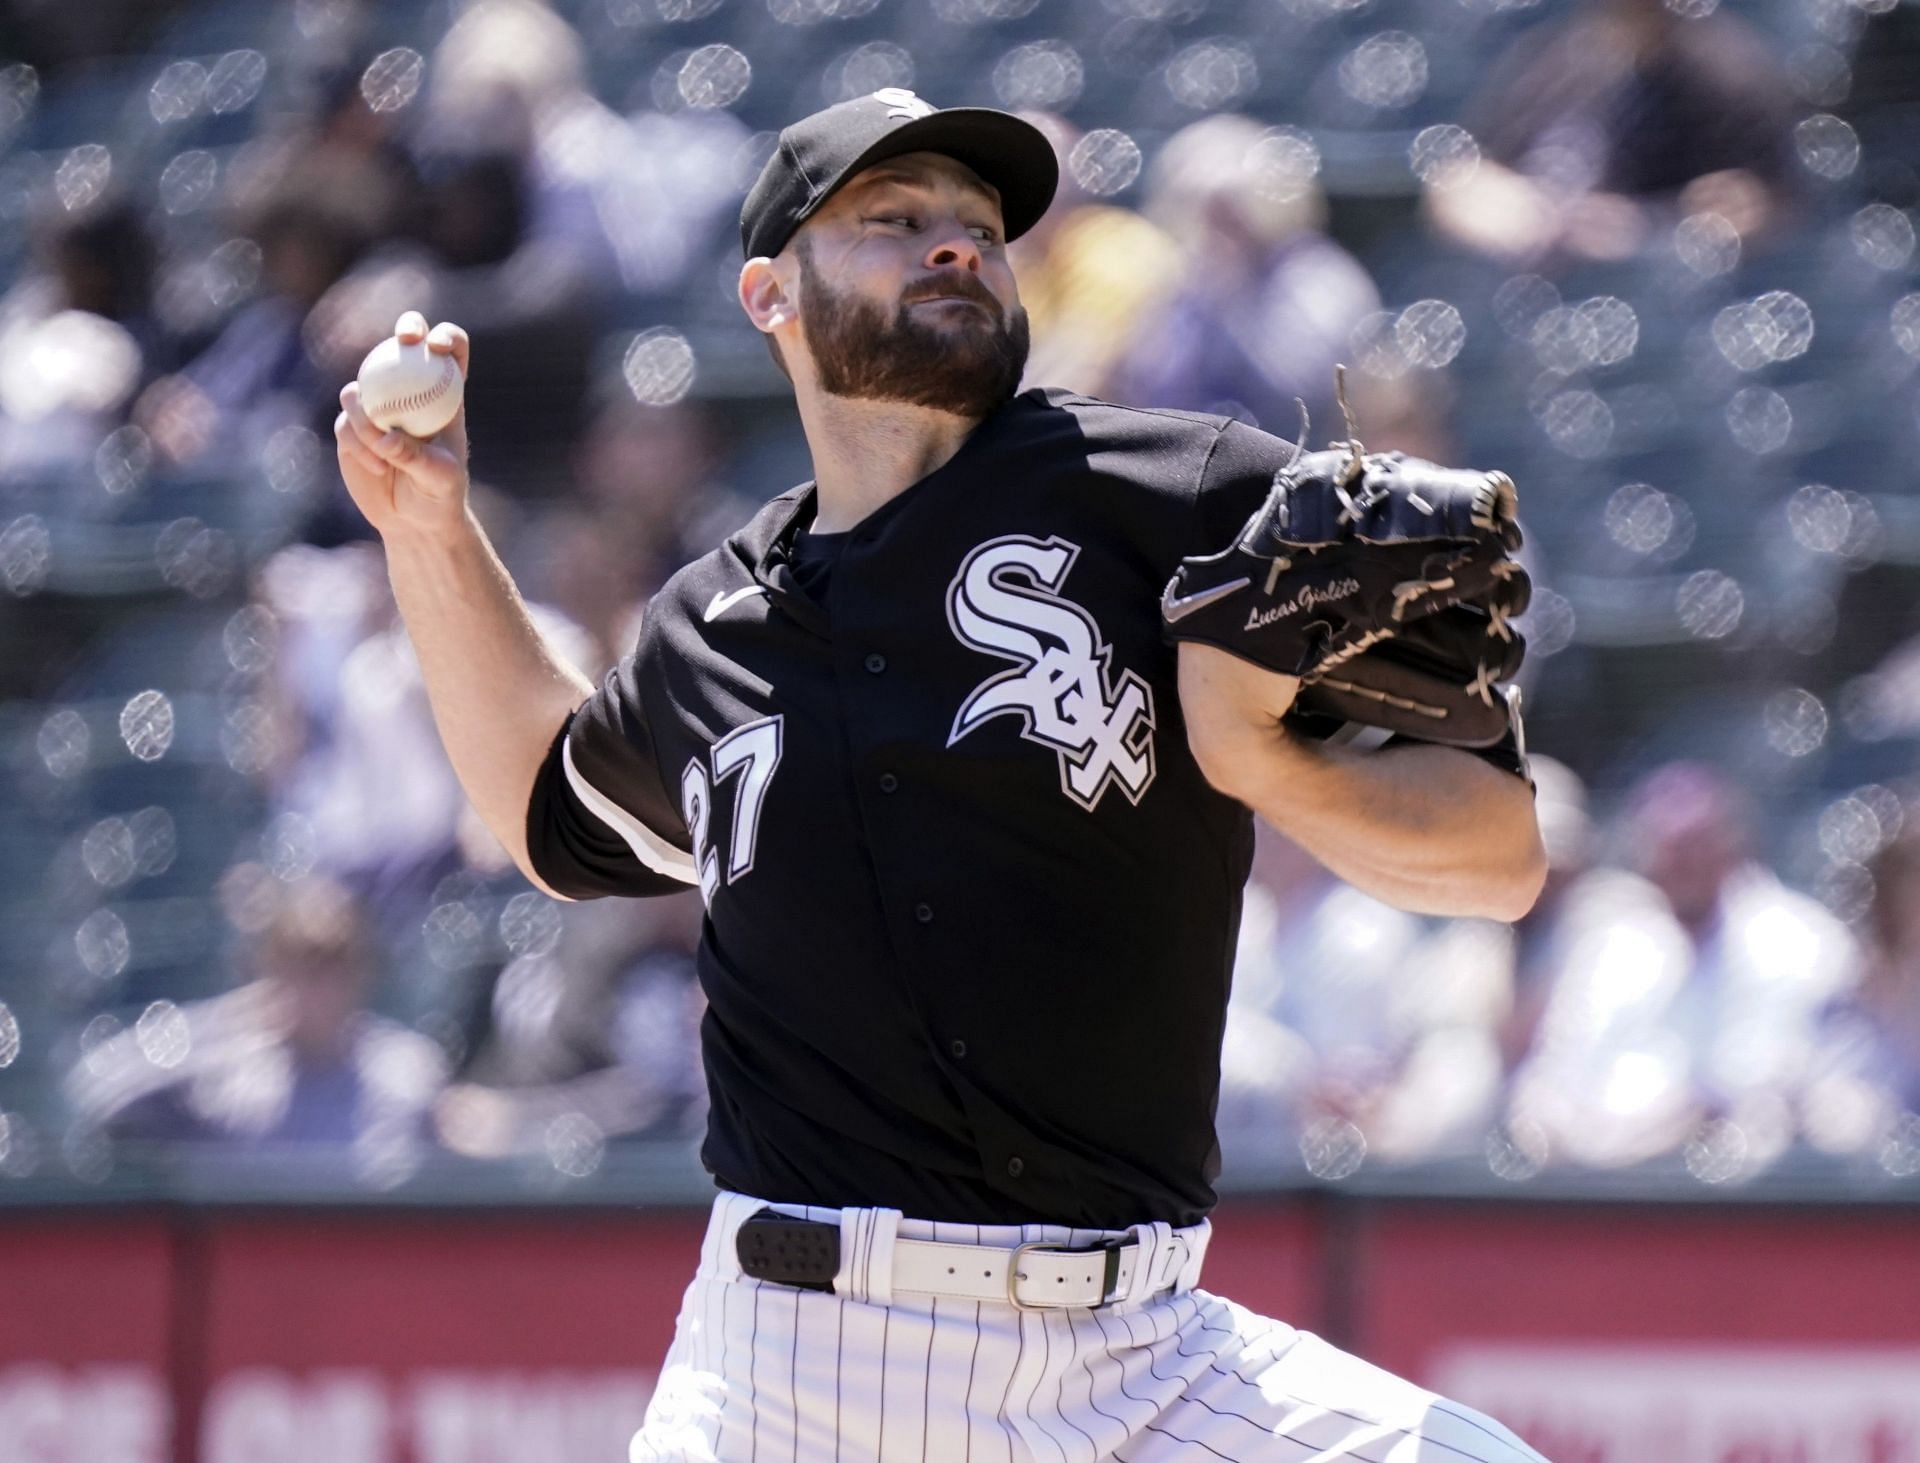 RHP Lucas Giolito sparks intrigue after indications he may be